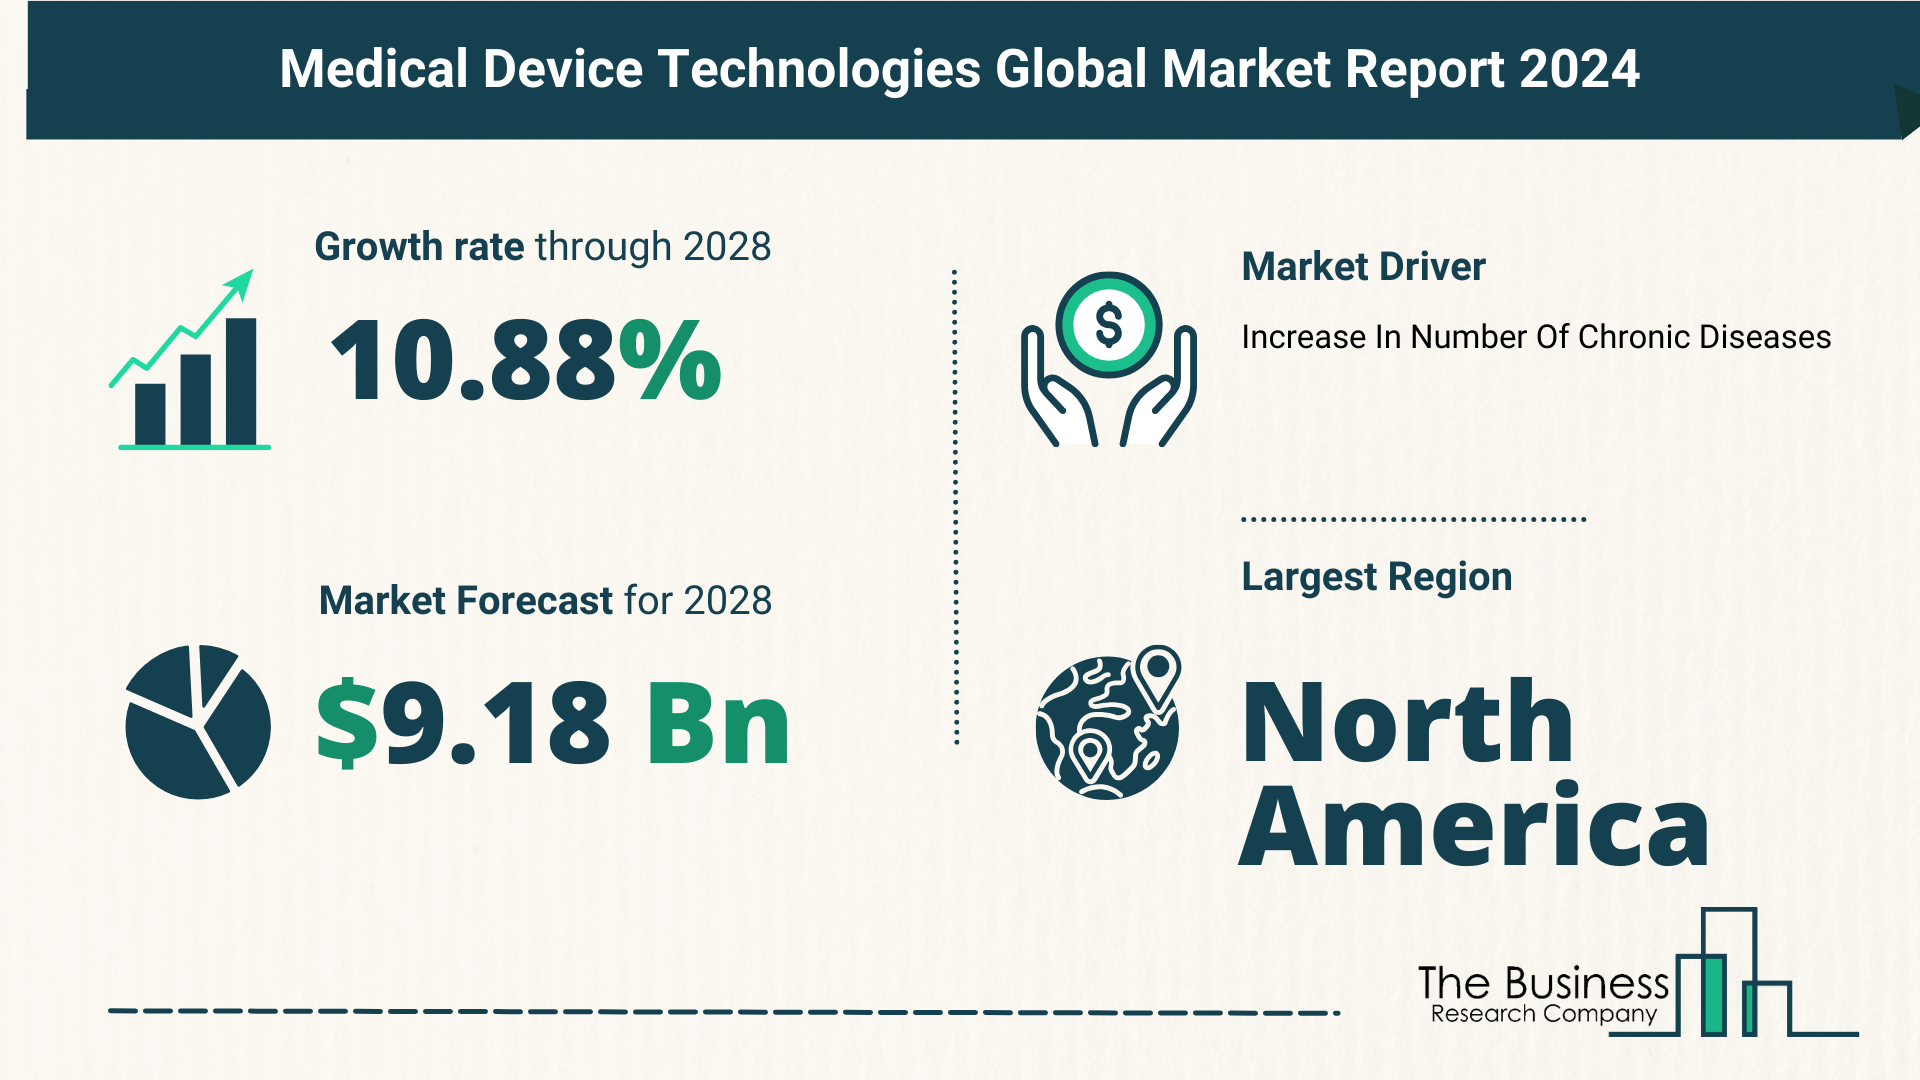 Key Trends And Drivers In The Medical Device Technologies Market 2024